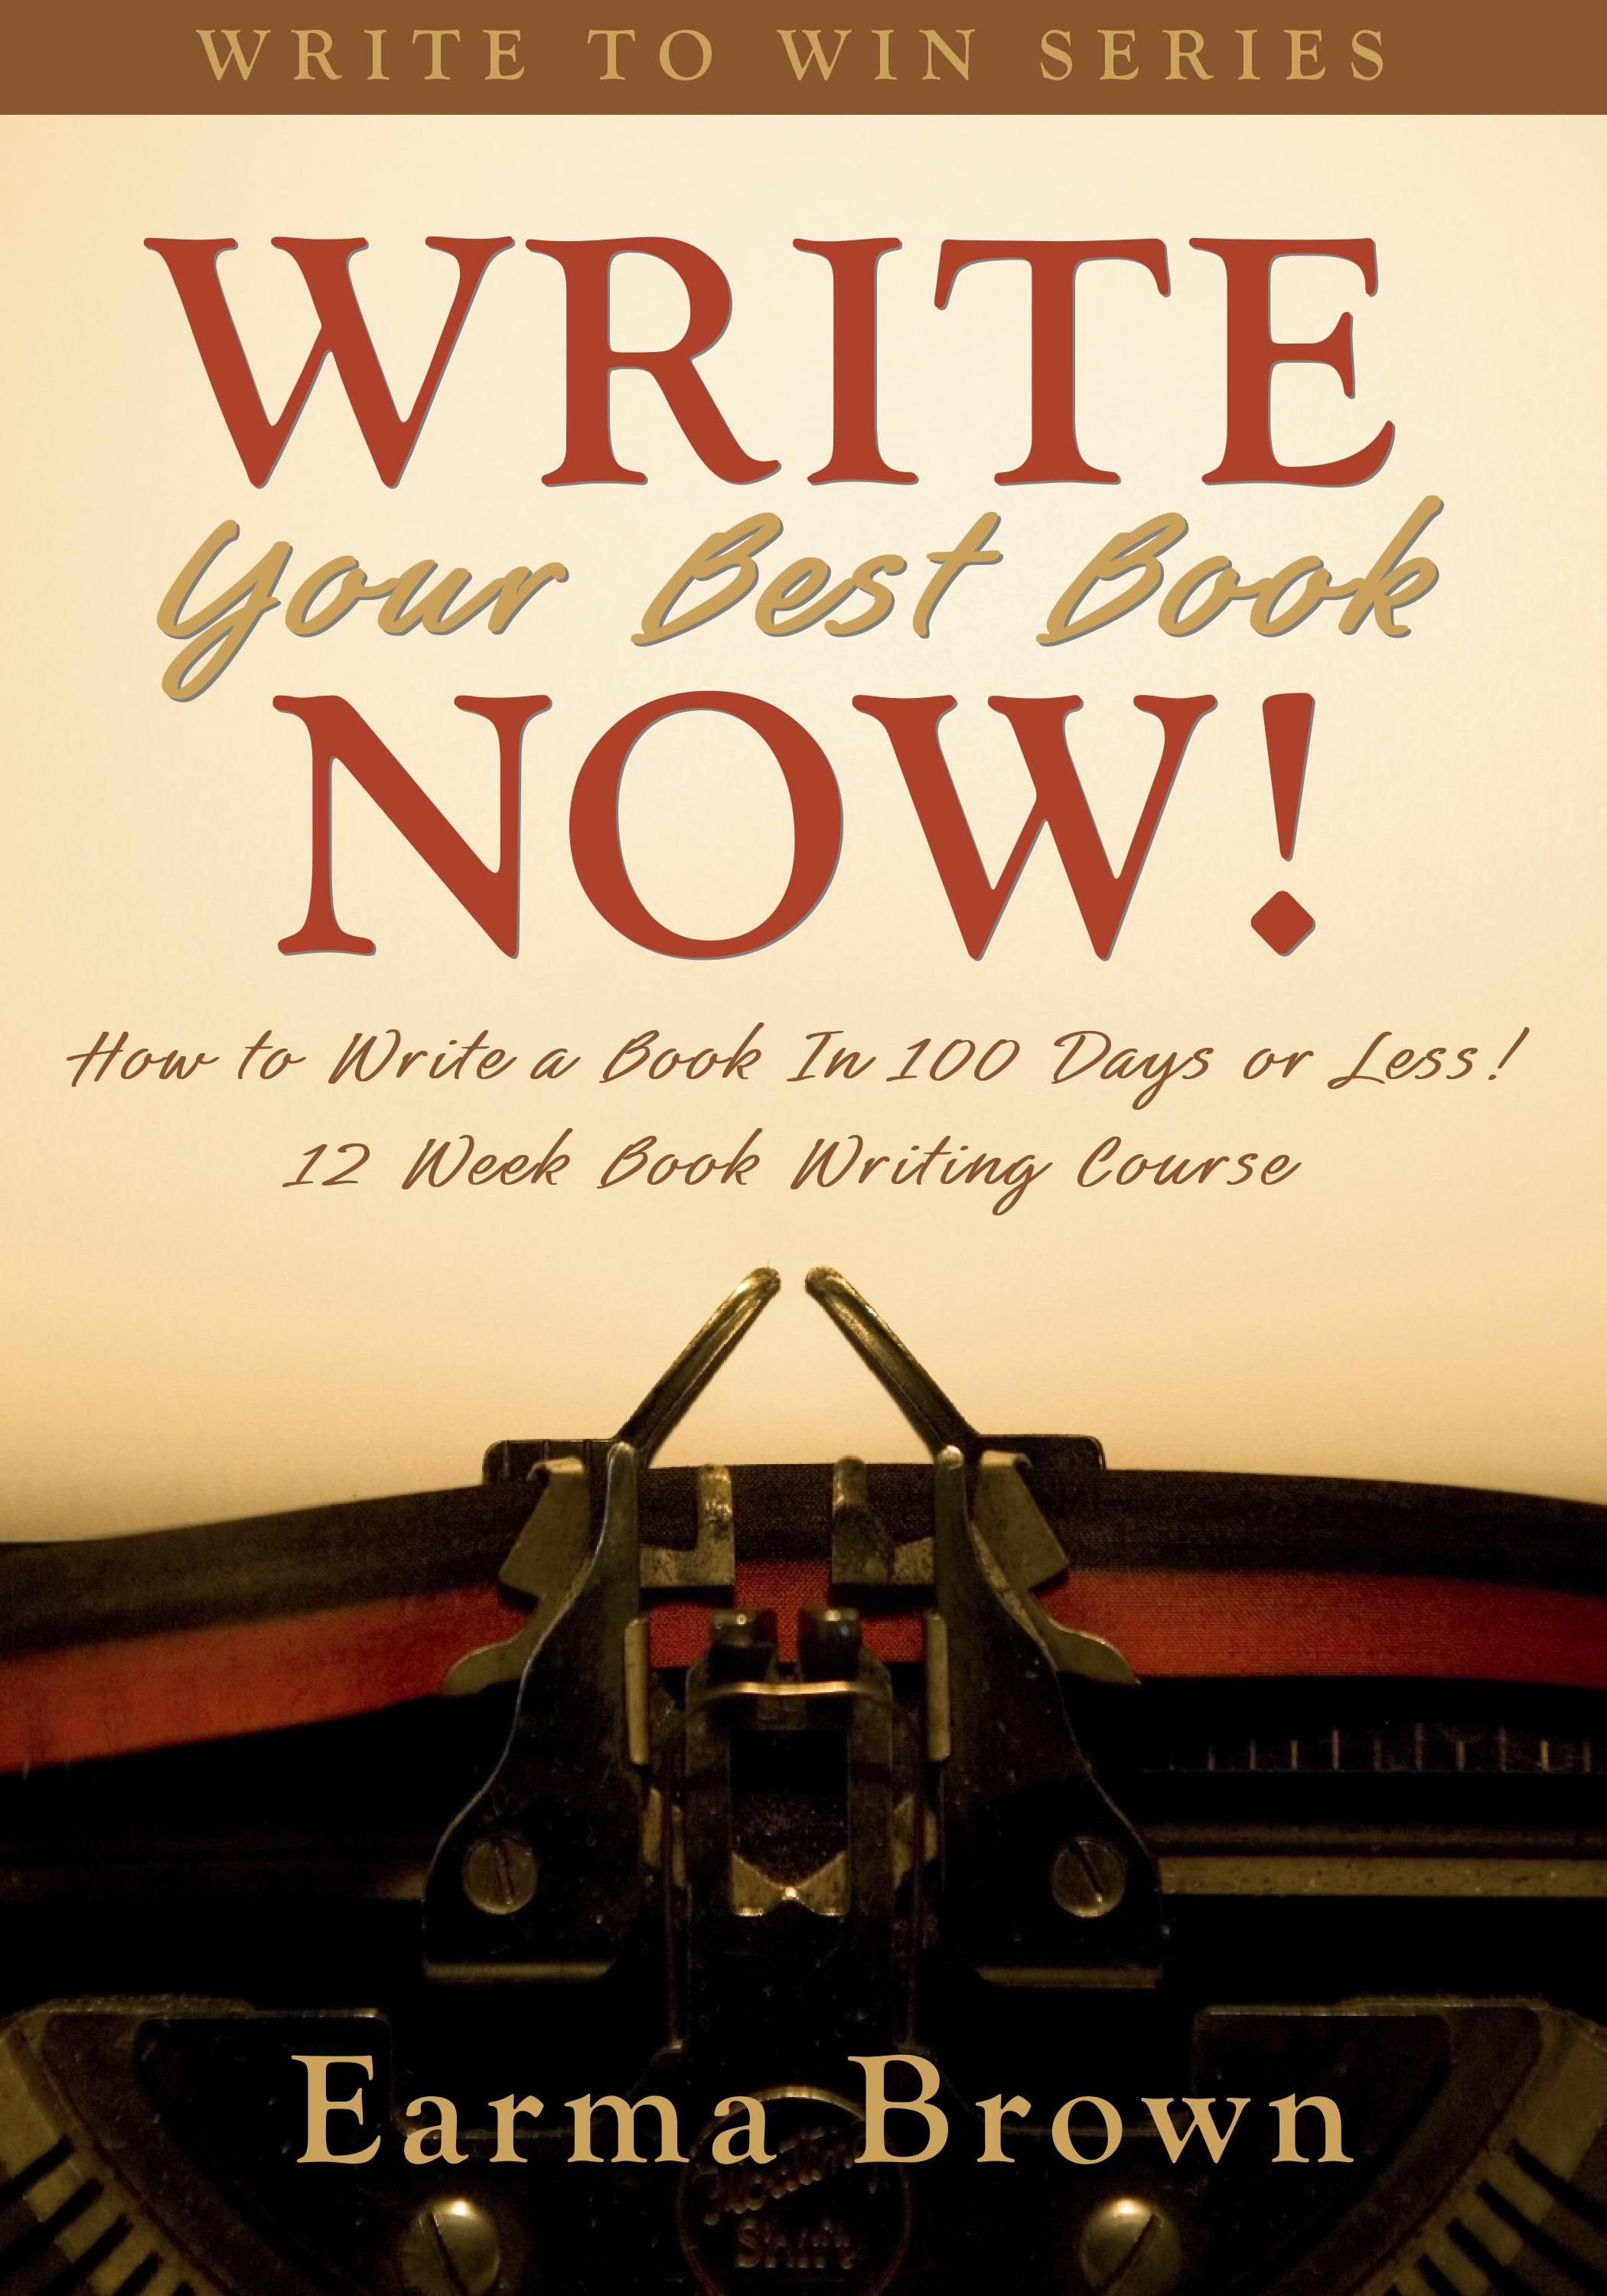 How to Write a Book In 100 Days - 12 Week Course Book